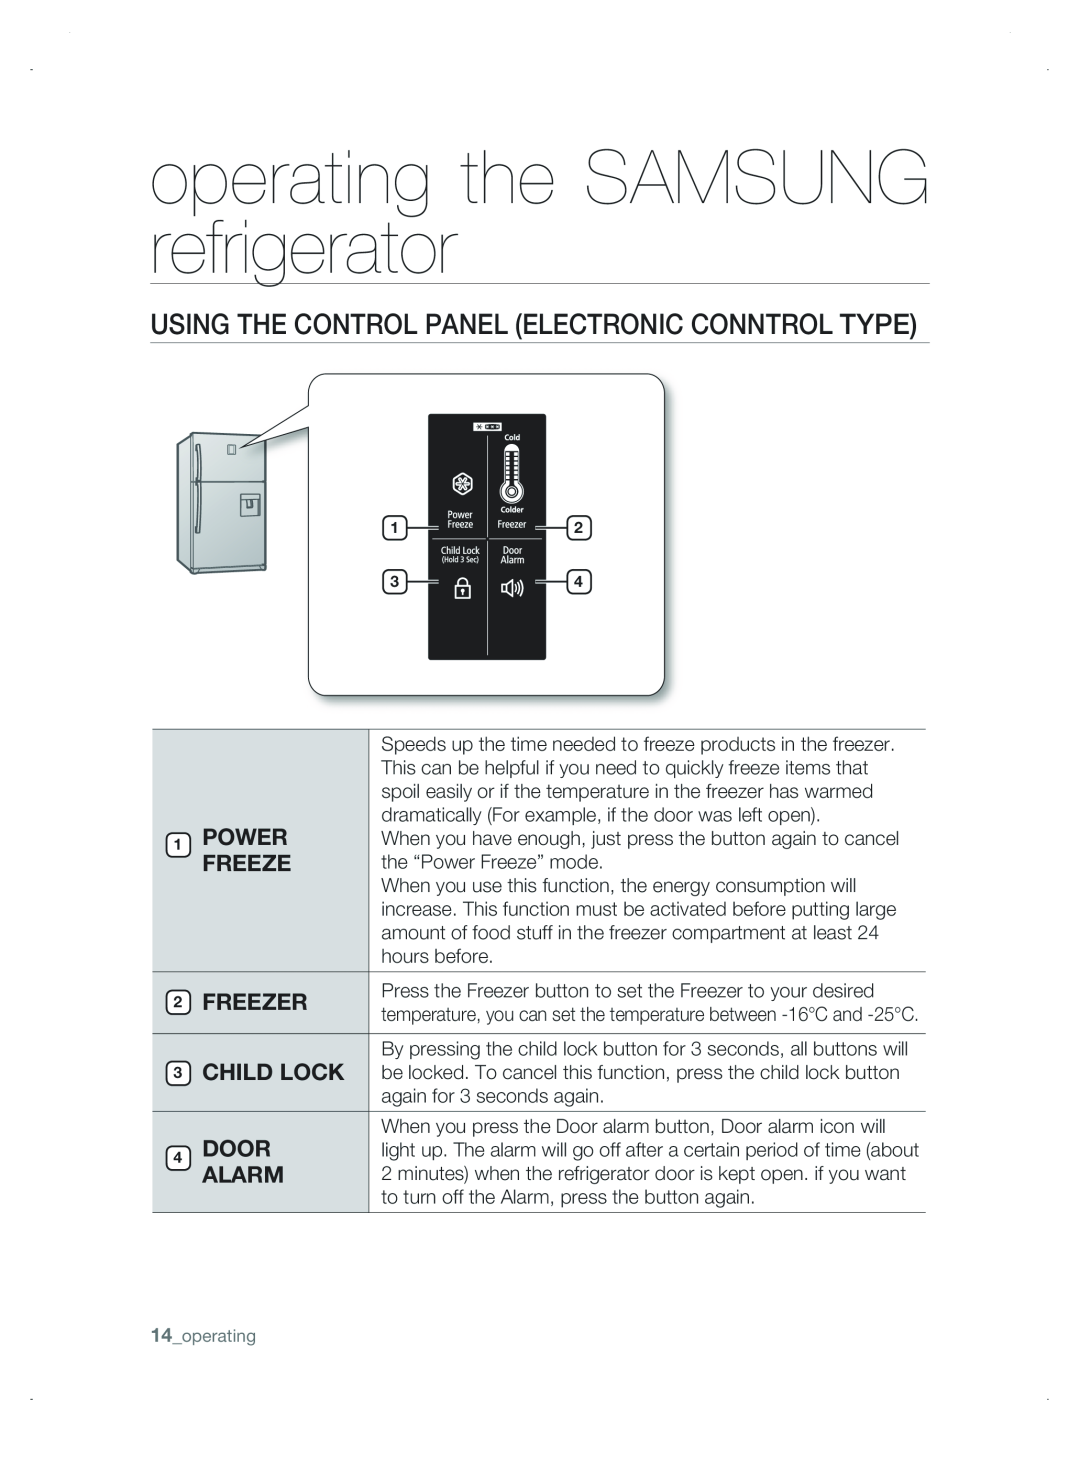 Samsung DA99-01906A operating the SAMSUNG refrigerator, Using The Control Panel Electronic Conntrol Type, Power, Freeze 